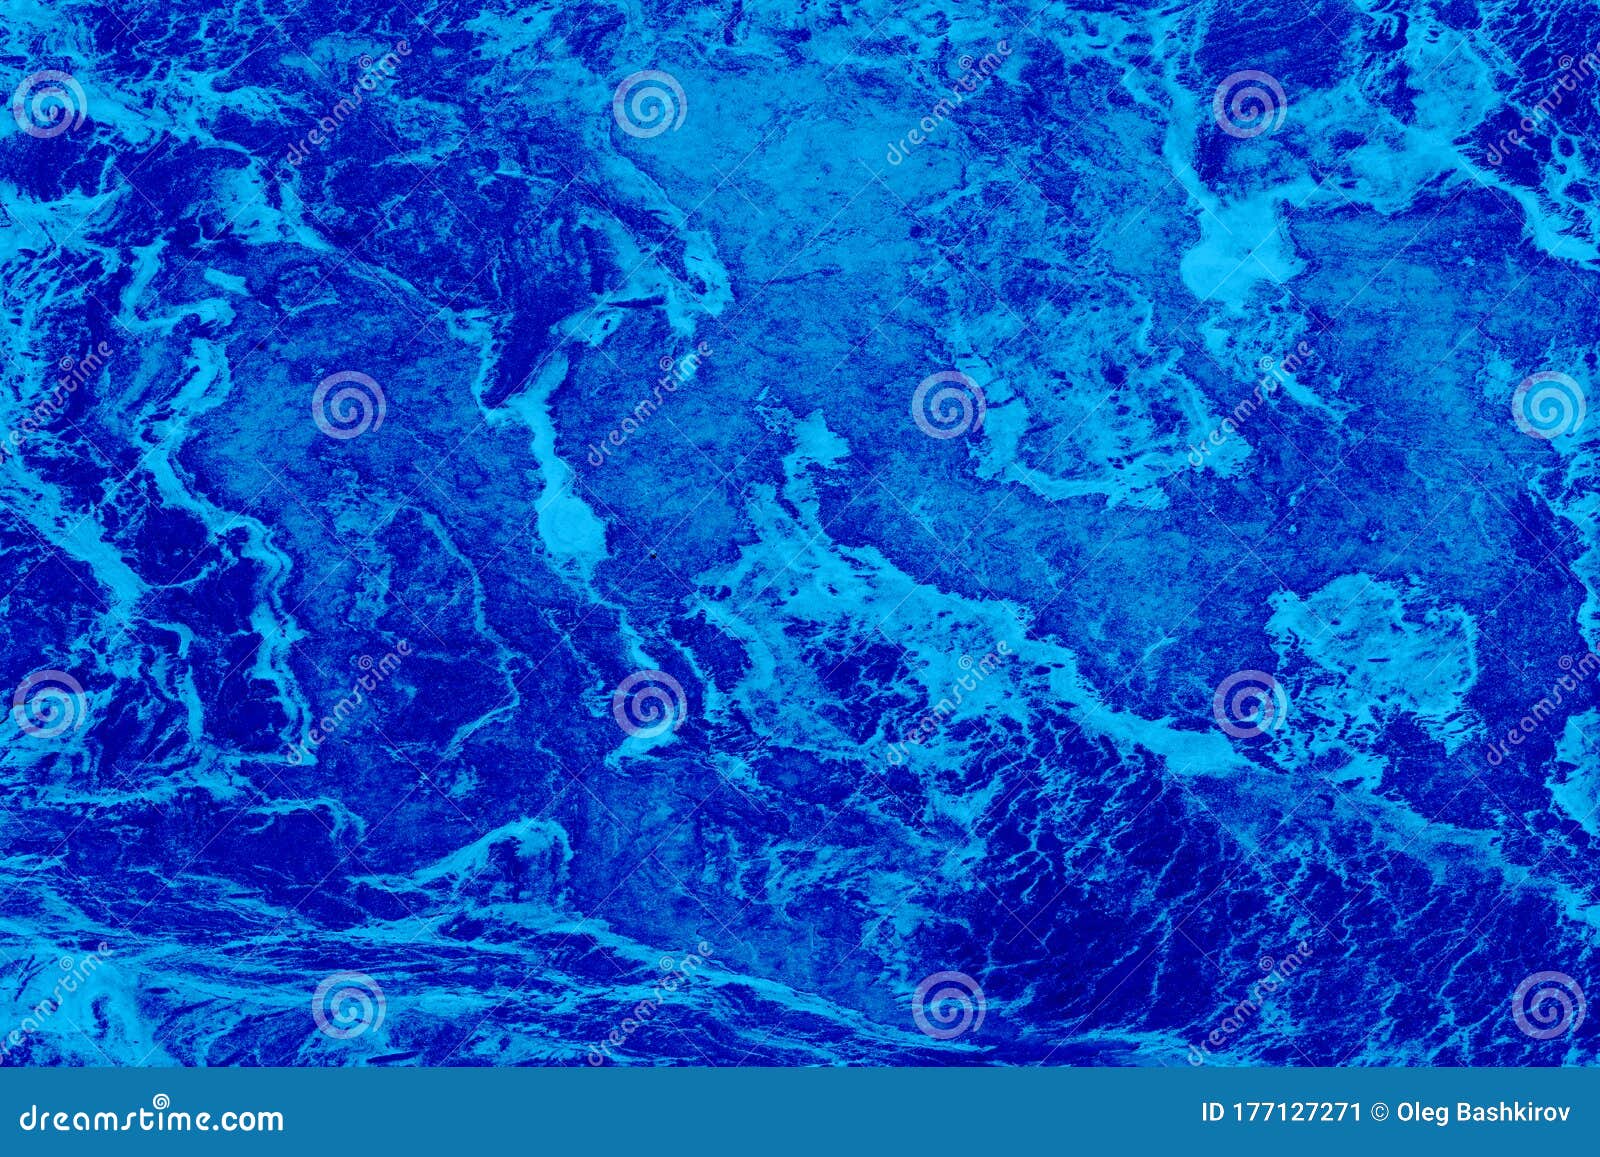 Abstract Cyan Blue Background Stock Image - Image of cover, color: 177127271